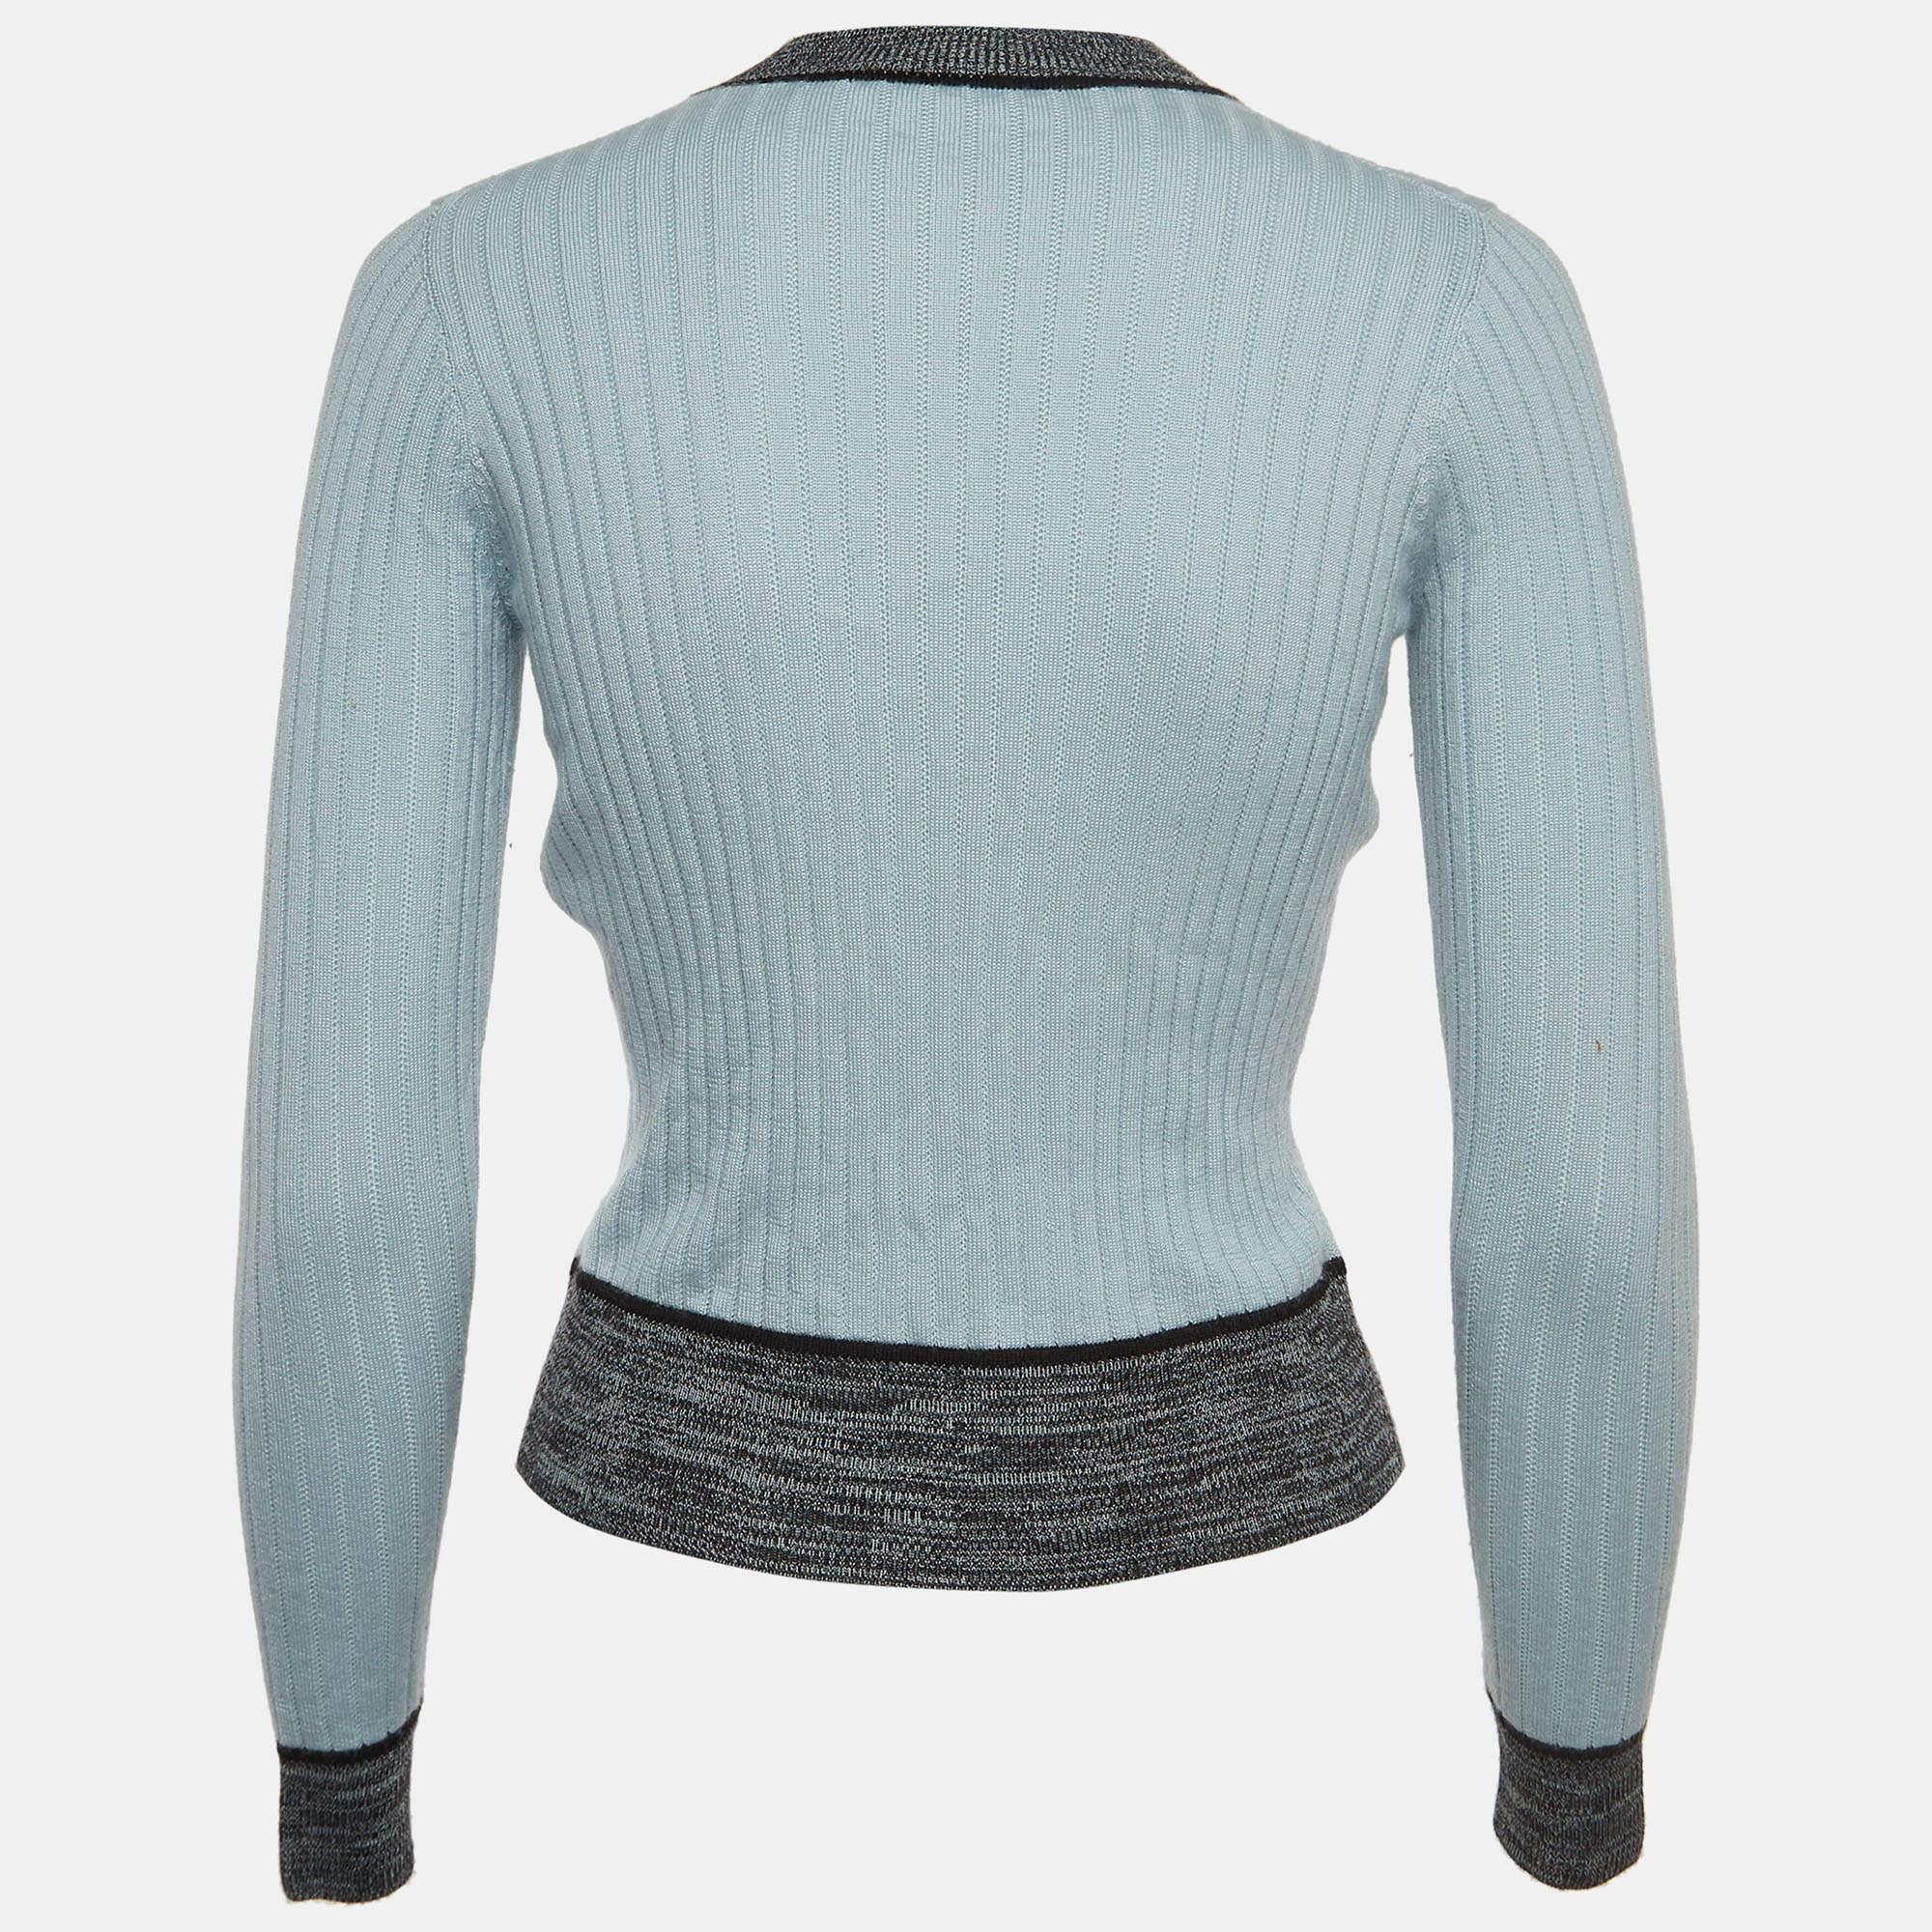 Wrap yourself in warmth and style with this Dior light blue sweater. Meticulously crafted for comfort and fashion, it epitomizes timeless sophistication. Each stitch reflects quality, making it an essential piece for every wardrobe.

